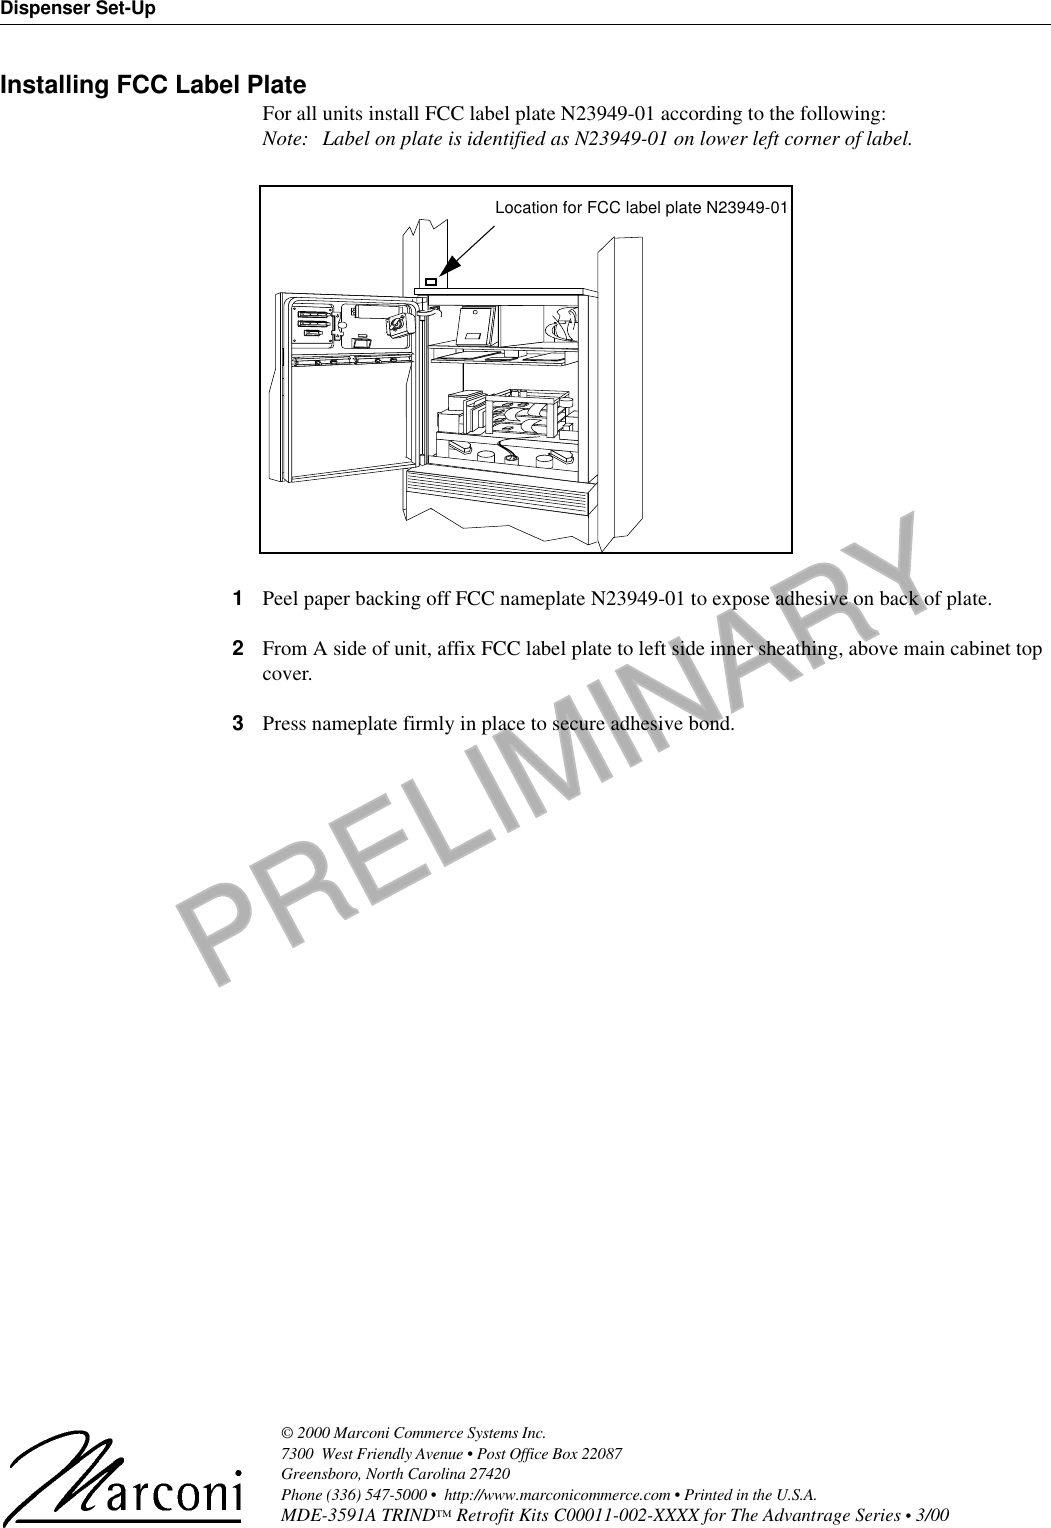 PRELIMINARYDispenser Set-Up© 2000 Marconi Commerce Systems Inc. 7300  West Friendly Avenue • Post Office Box 22087Greensboro, North Carolina 27420 Phone (336) 547-5000 •  http://www.marconicommerce.com • Printed in the U.S.A.MDE-3591A TRIND™ Retrofit Kits C00011-002-XXXX for The Advantrage Series • 3/00 Installing FCC Label PlateFor all units install FCC label plate N23949-01 according to the following:Note: Label on plate is identified as N23949-01 on lower left corner of label.1Peel paper backing off FCC nameplate N23949-01 to expose adhesive on back of plate.2From A side of unit, affix FCC label plate to left side inner sheathing, above main cabinet top cover.3Press nameplate firmly in place to secure adhesive bond.Location for FCC label plate N23949-01